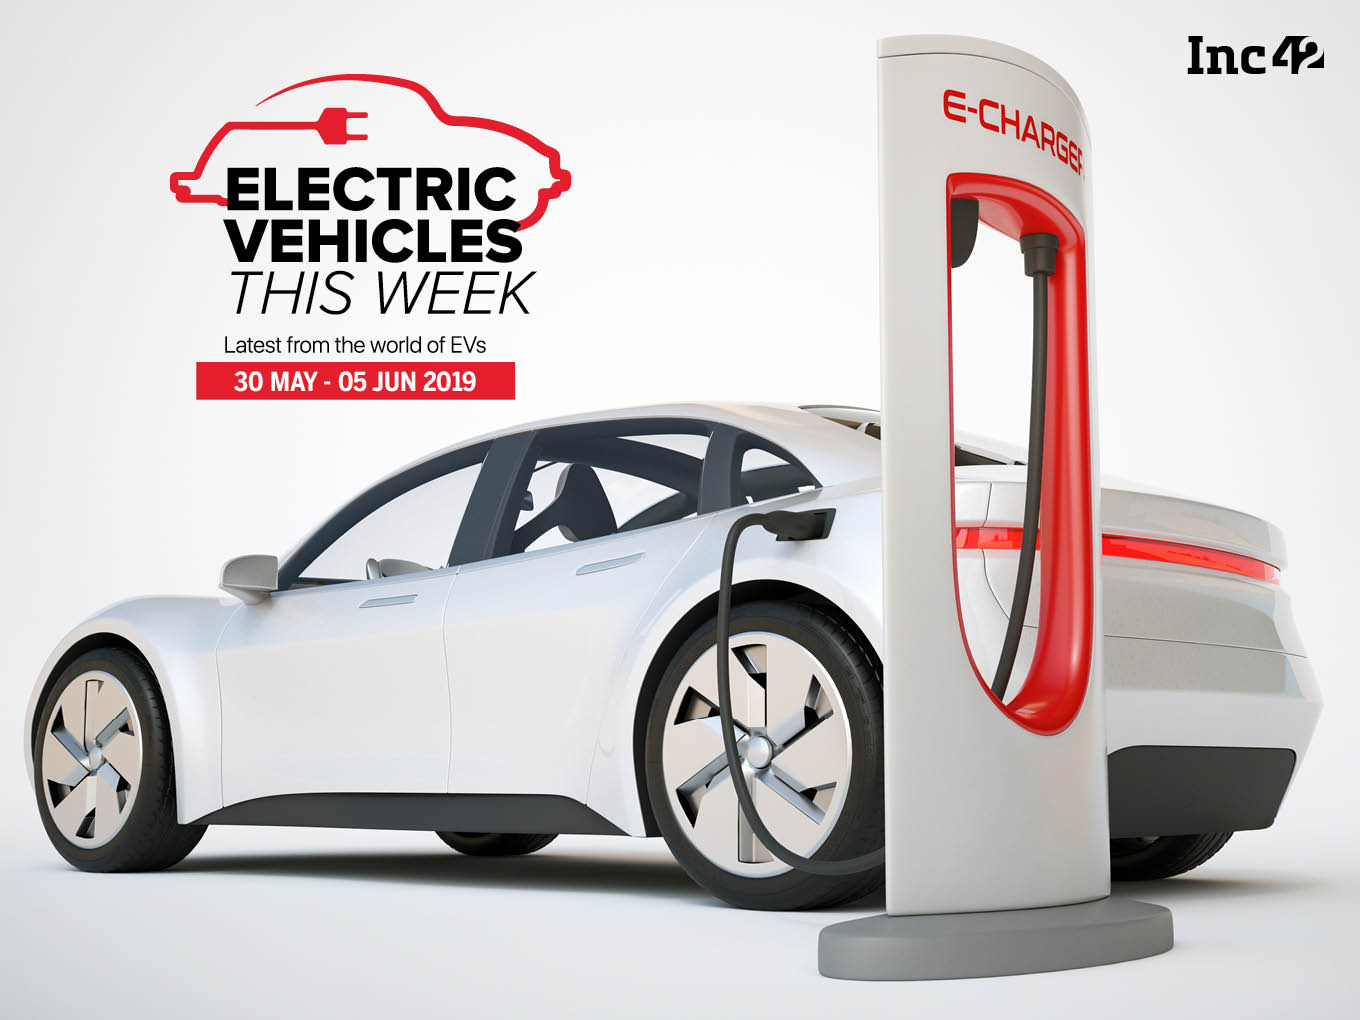 Electric Vehicles This Week: Govt Proposes 5K Electric Buses, Mahindra Deepens EV Focus